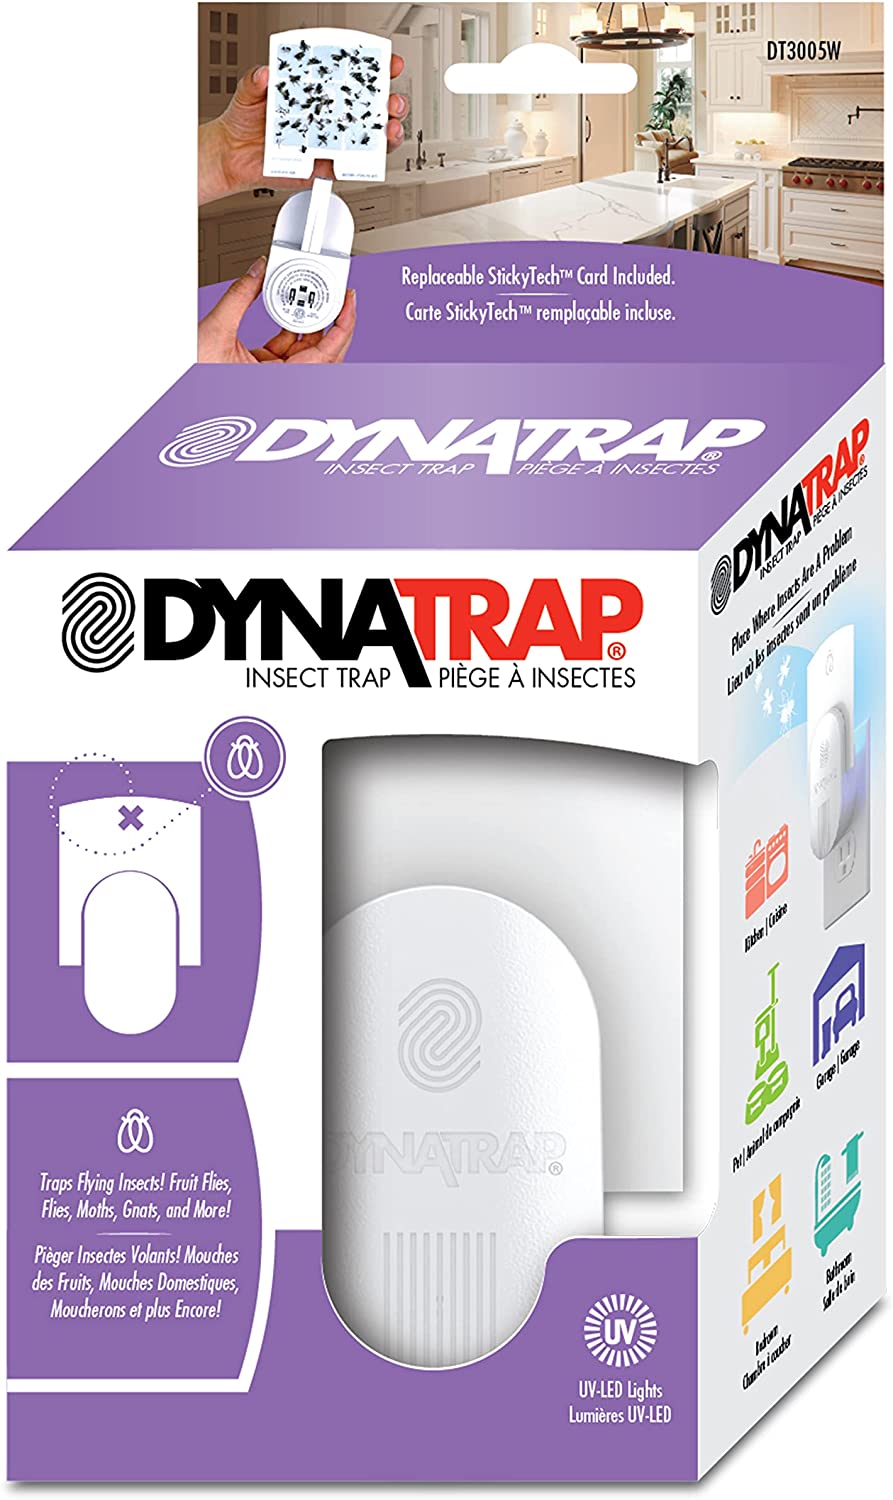 DynaTrap DT3005W Indoor Plug-In Insect Fly Trap $8.39 + Free Shipping w/ Prime or $25+